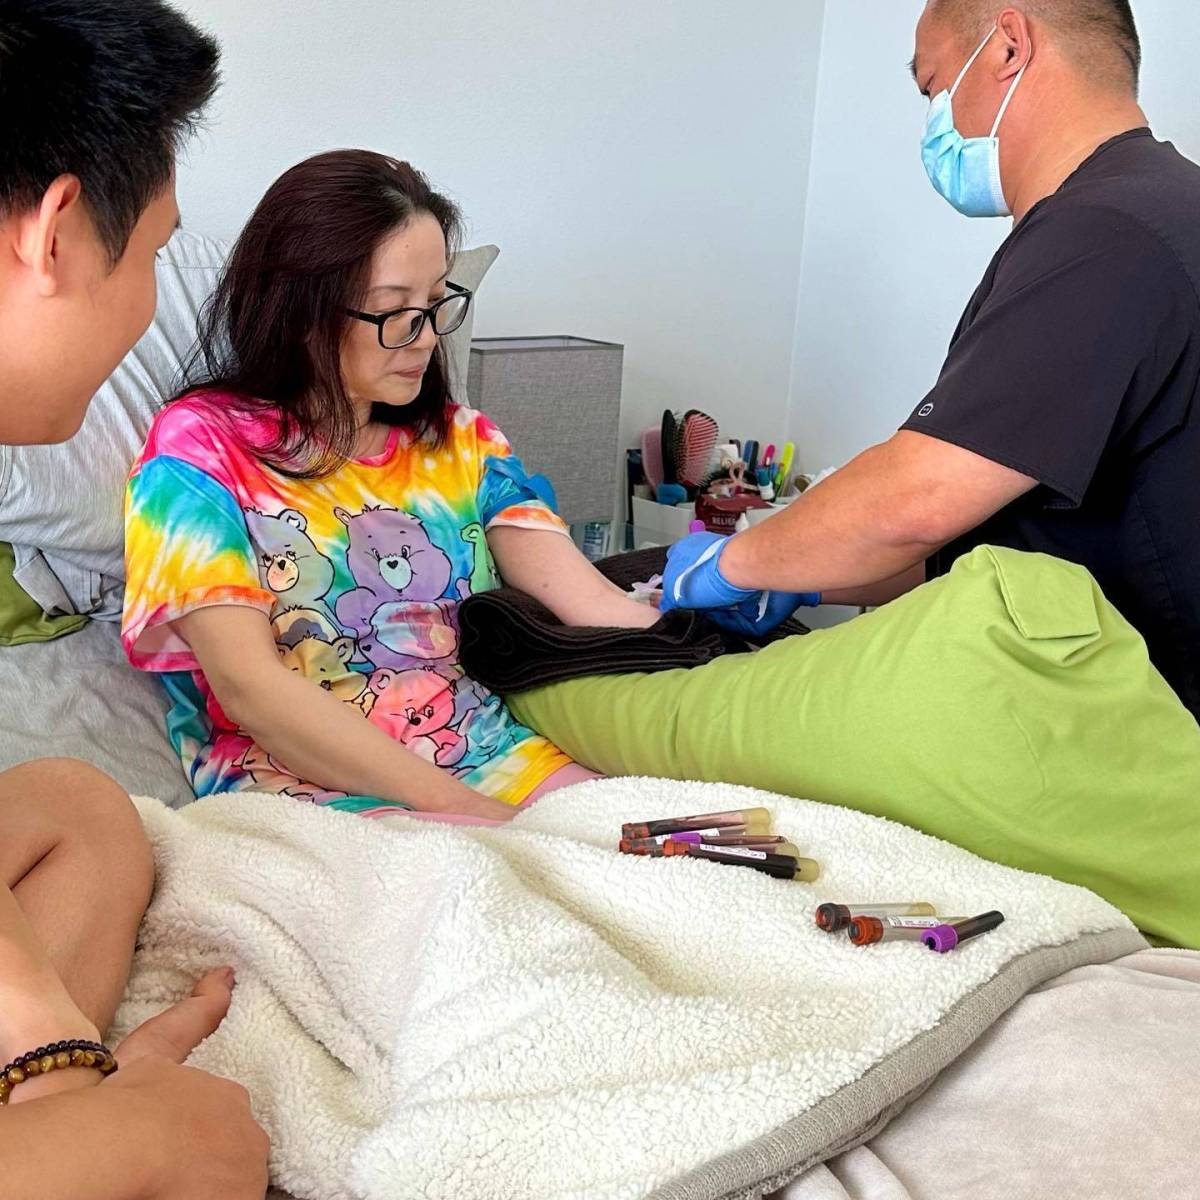 Kris Aquino is grateful for 'surviving all the side effects' of her strong medications. INSTAGRAM PHOTO/KRISAQUINO